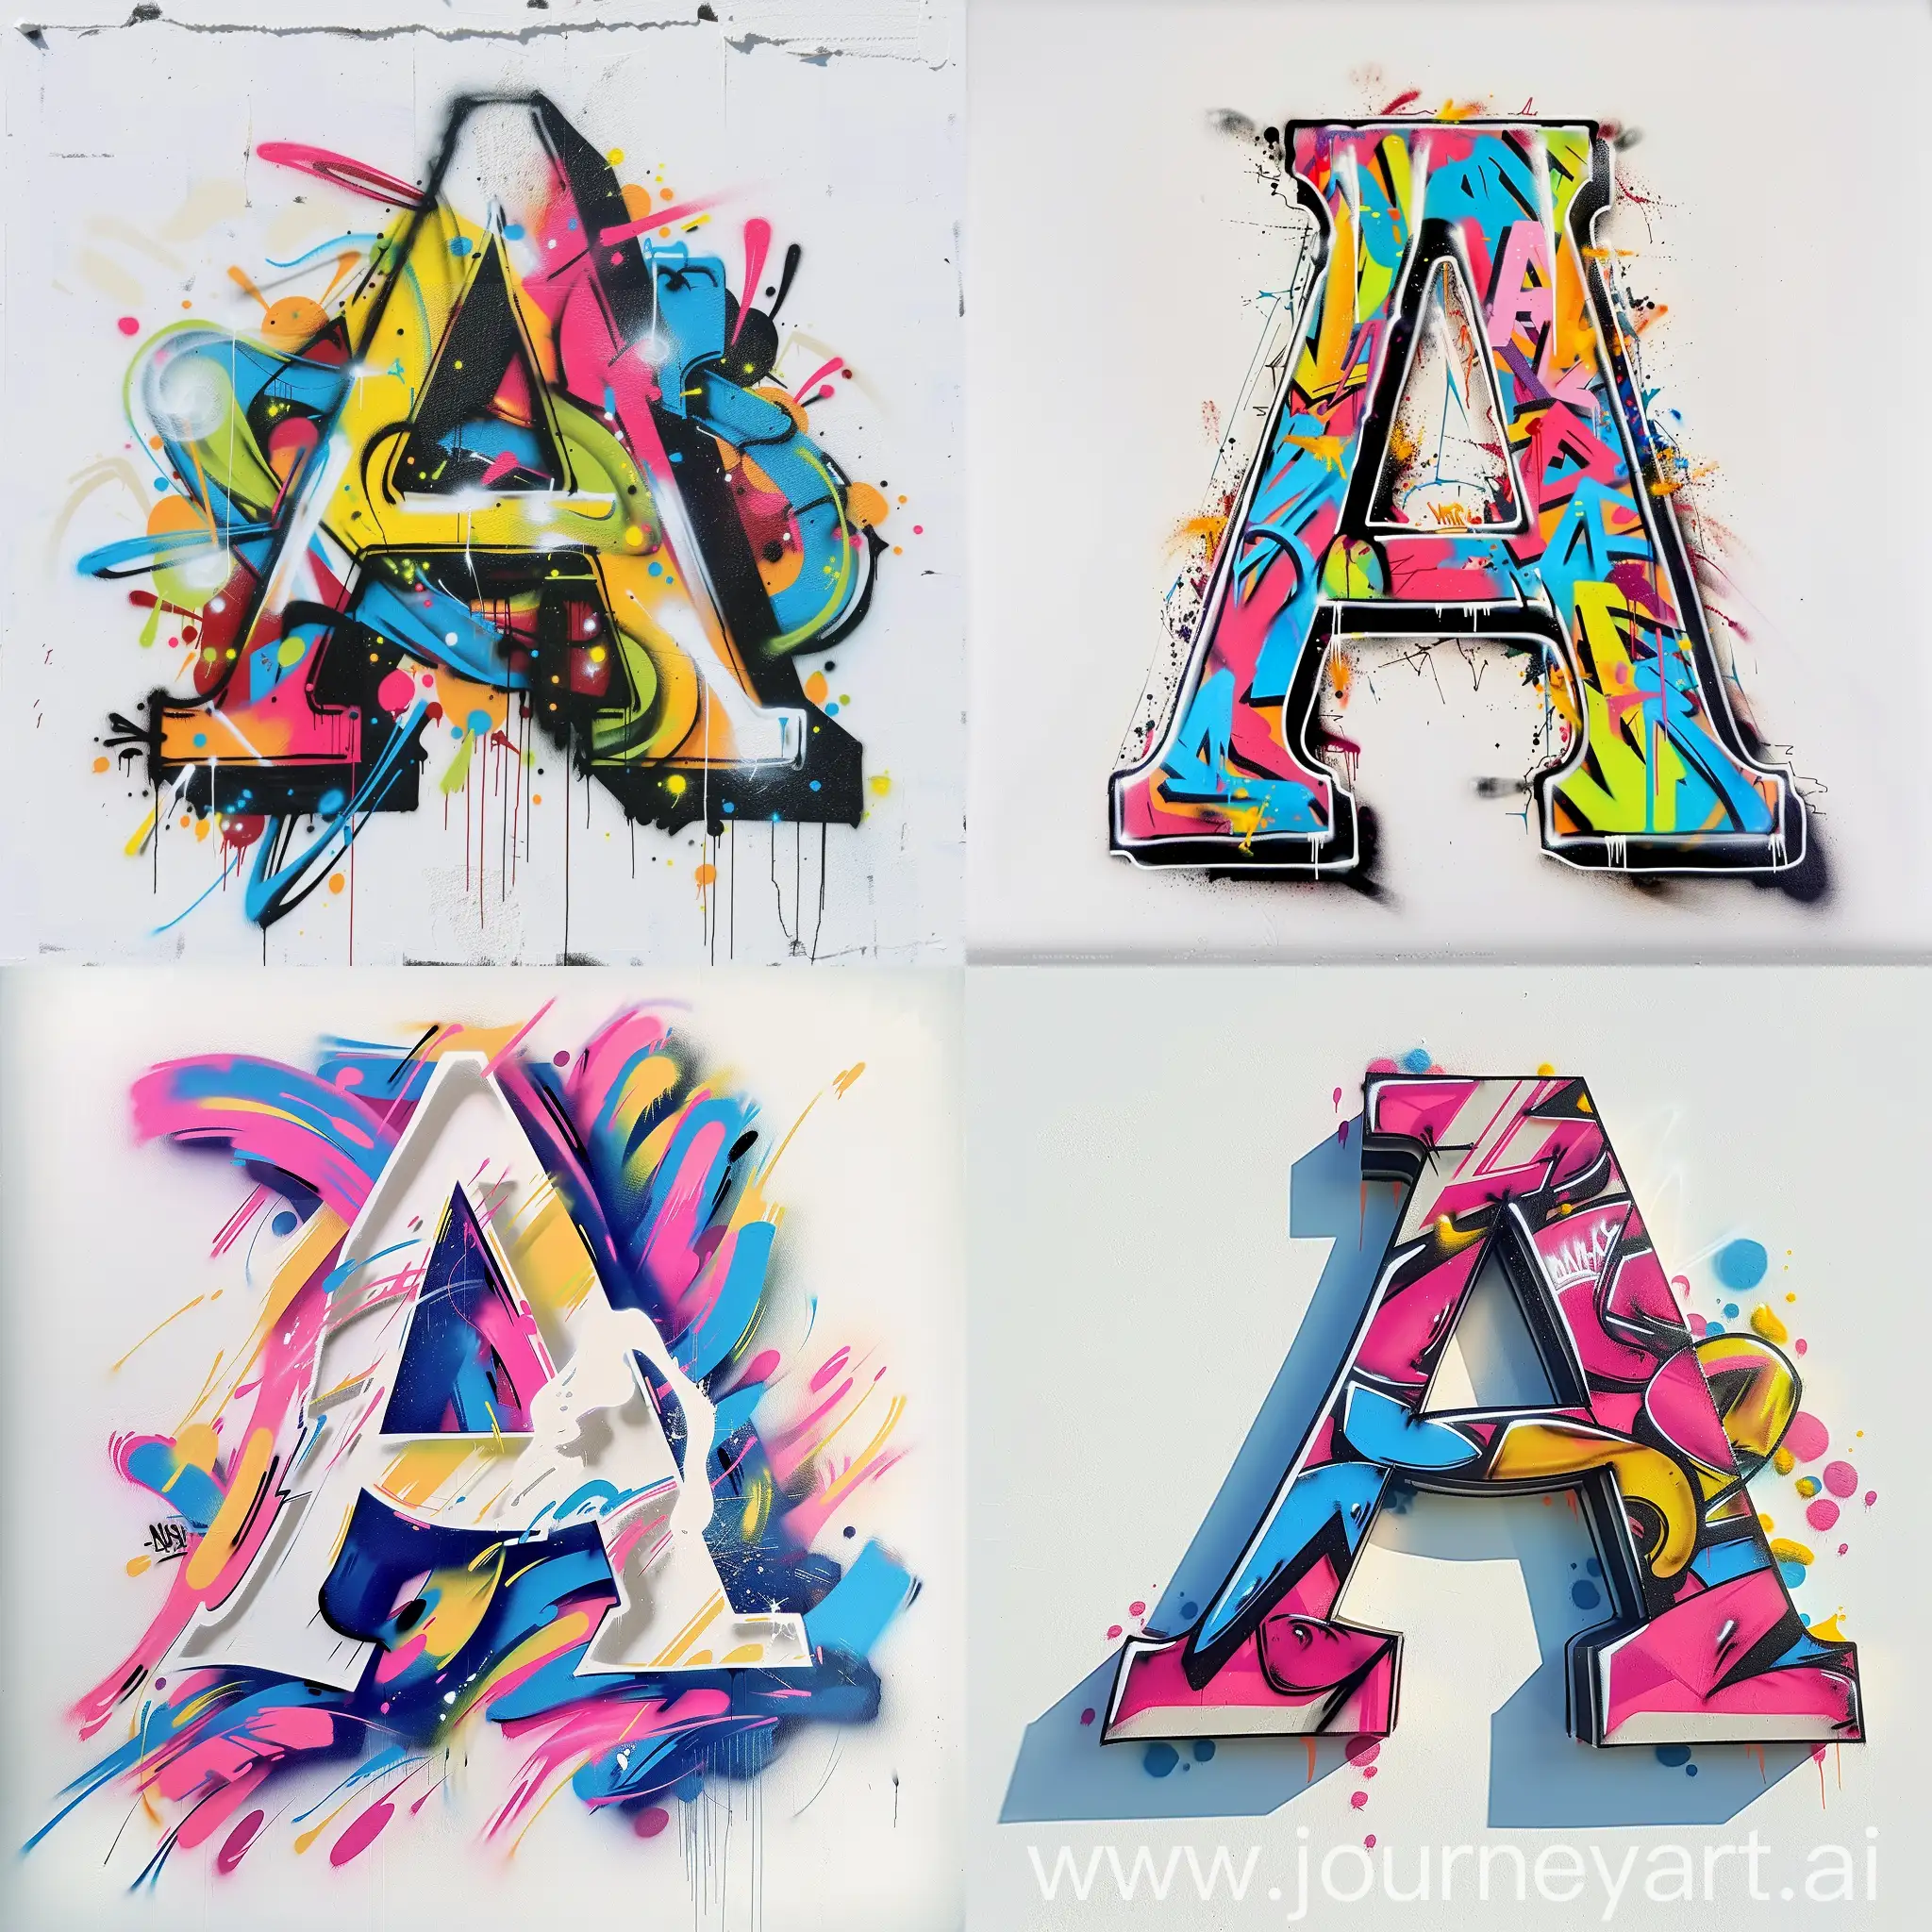 a graffiti art of the letter "A" on a white background, wild style